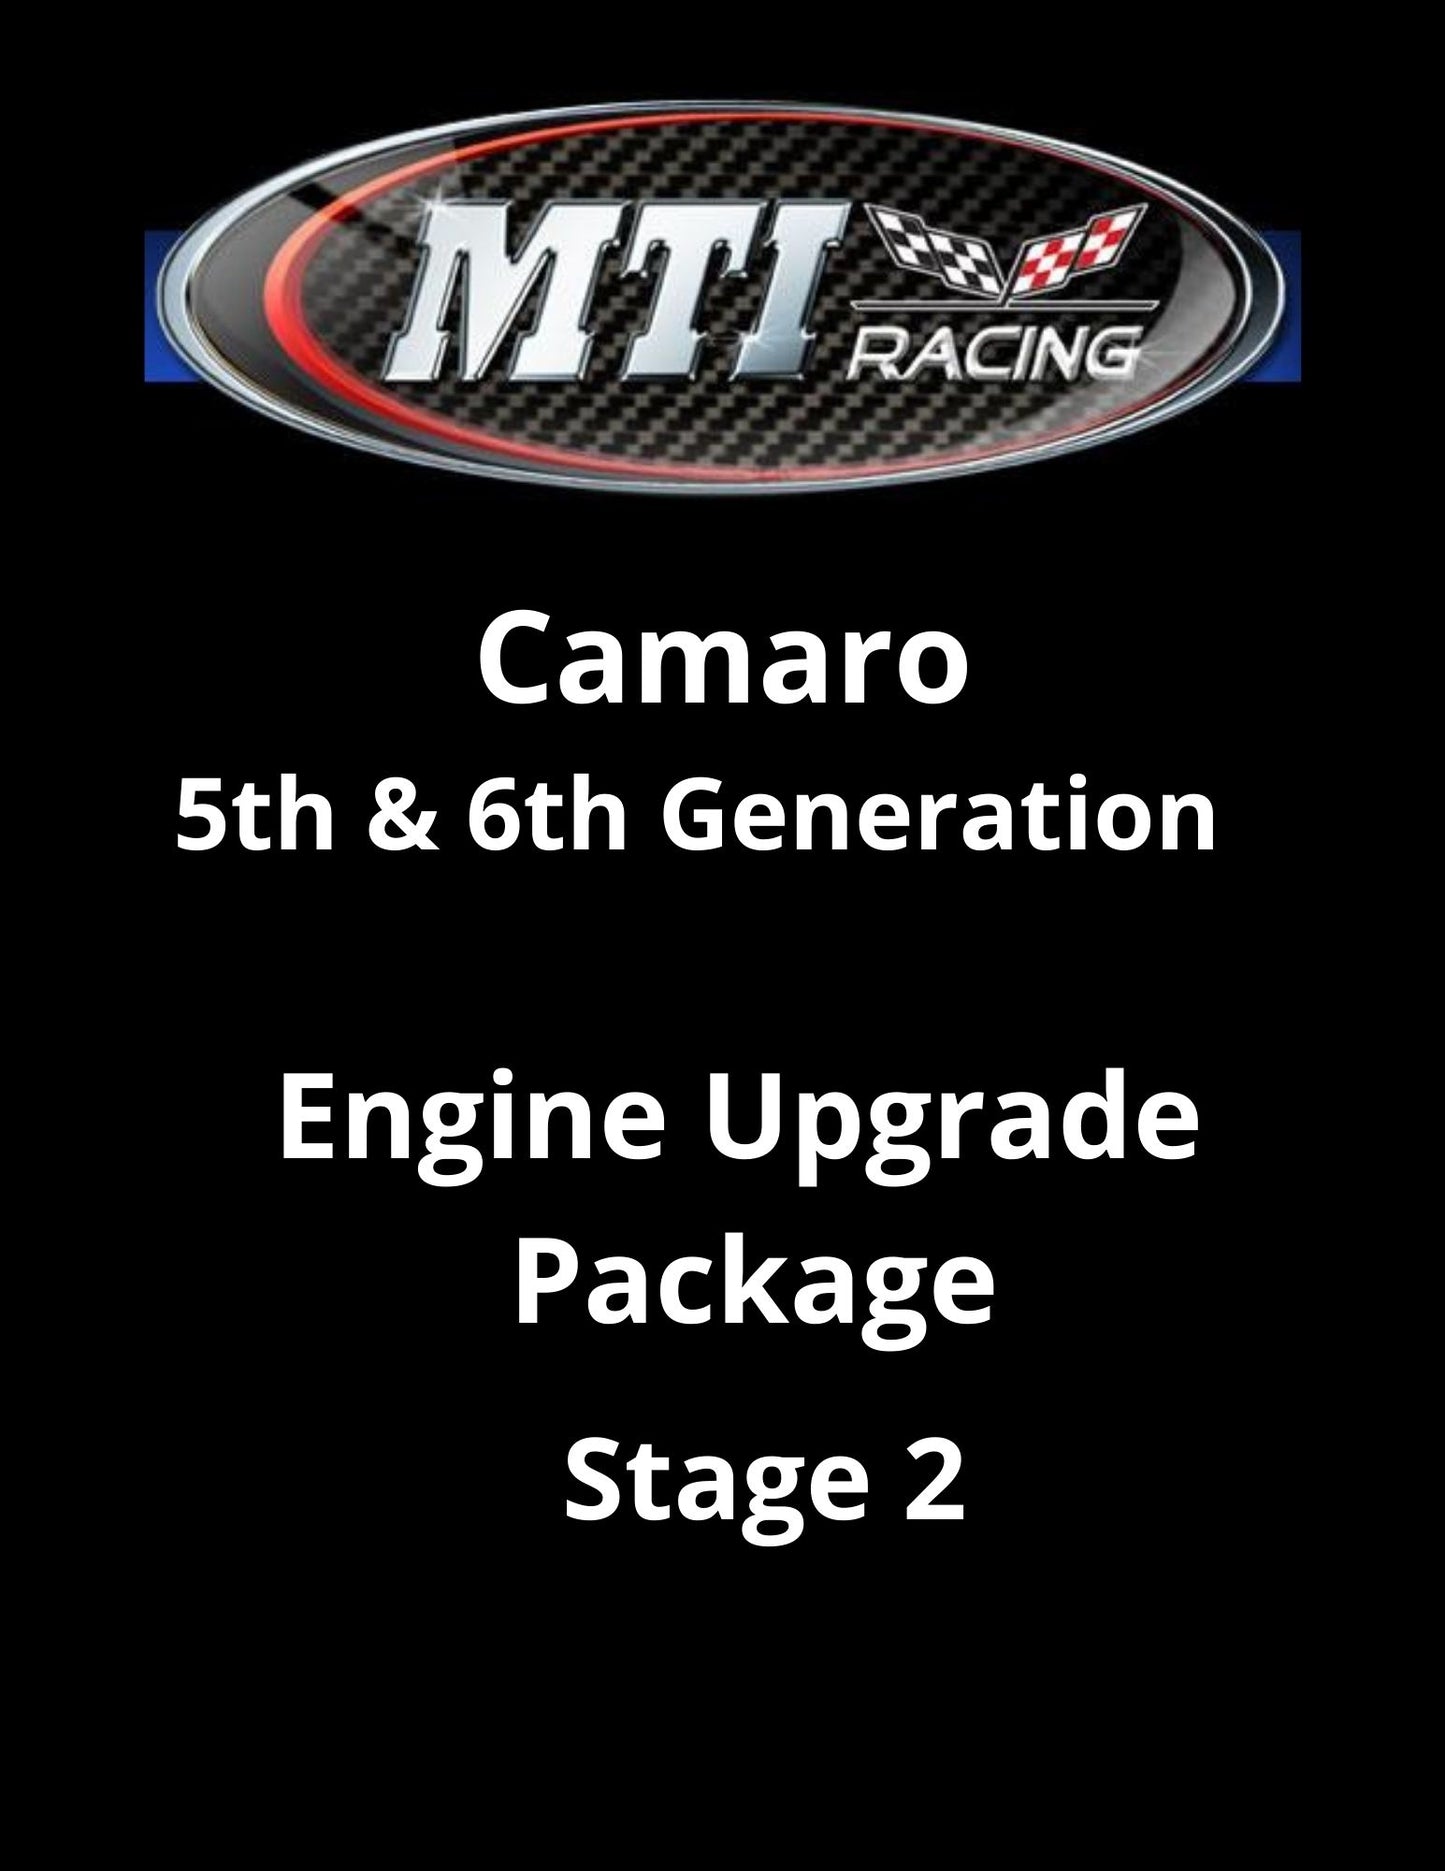 MTI Racing Camaro 5th & 6th Generation Engine Upgrade Package Stage 2